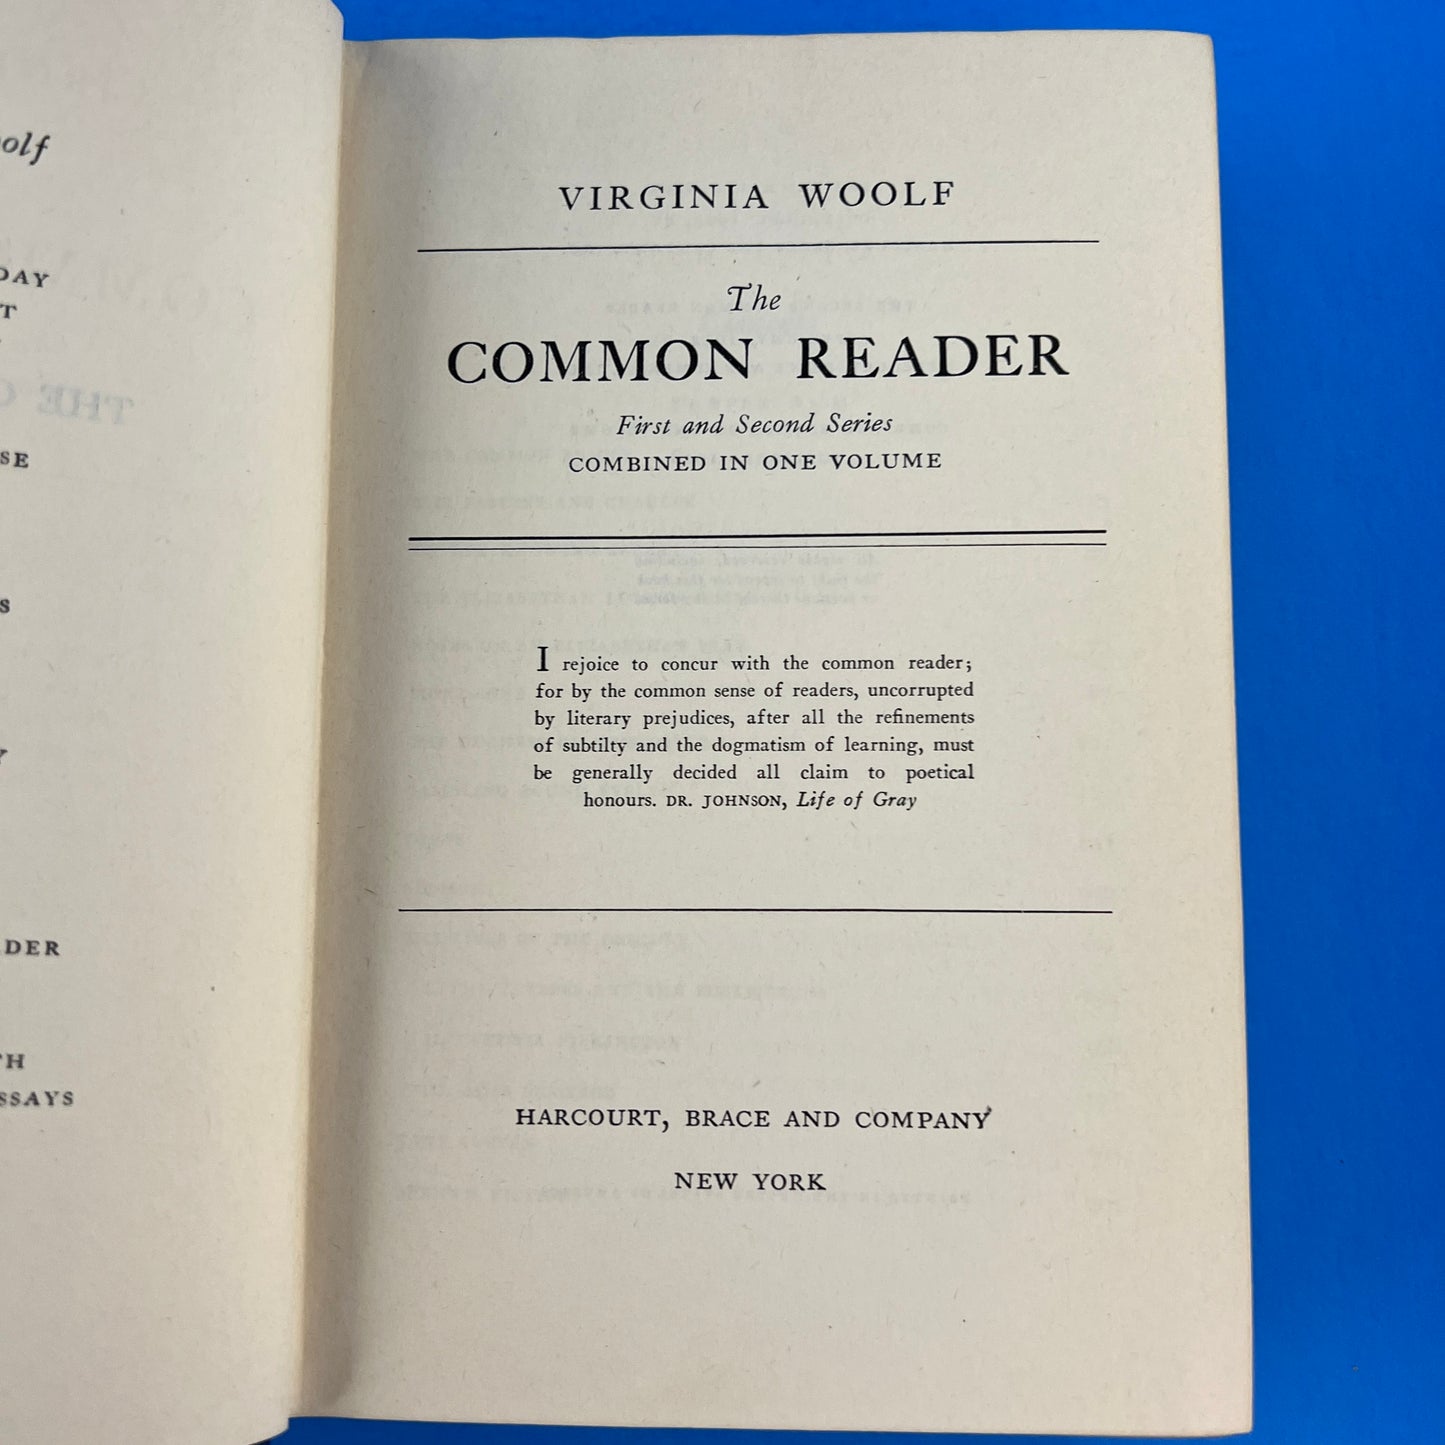 The Common Reader